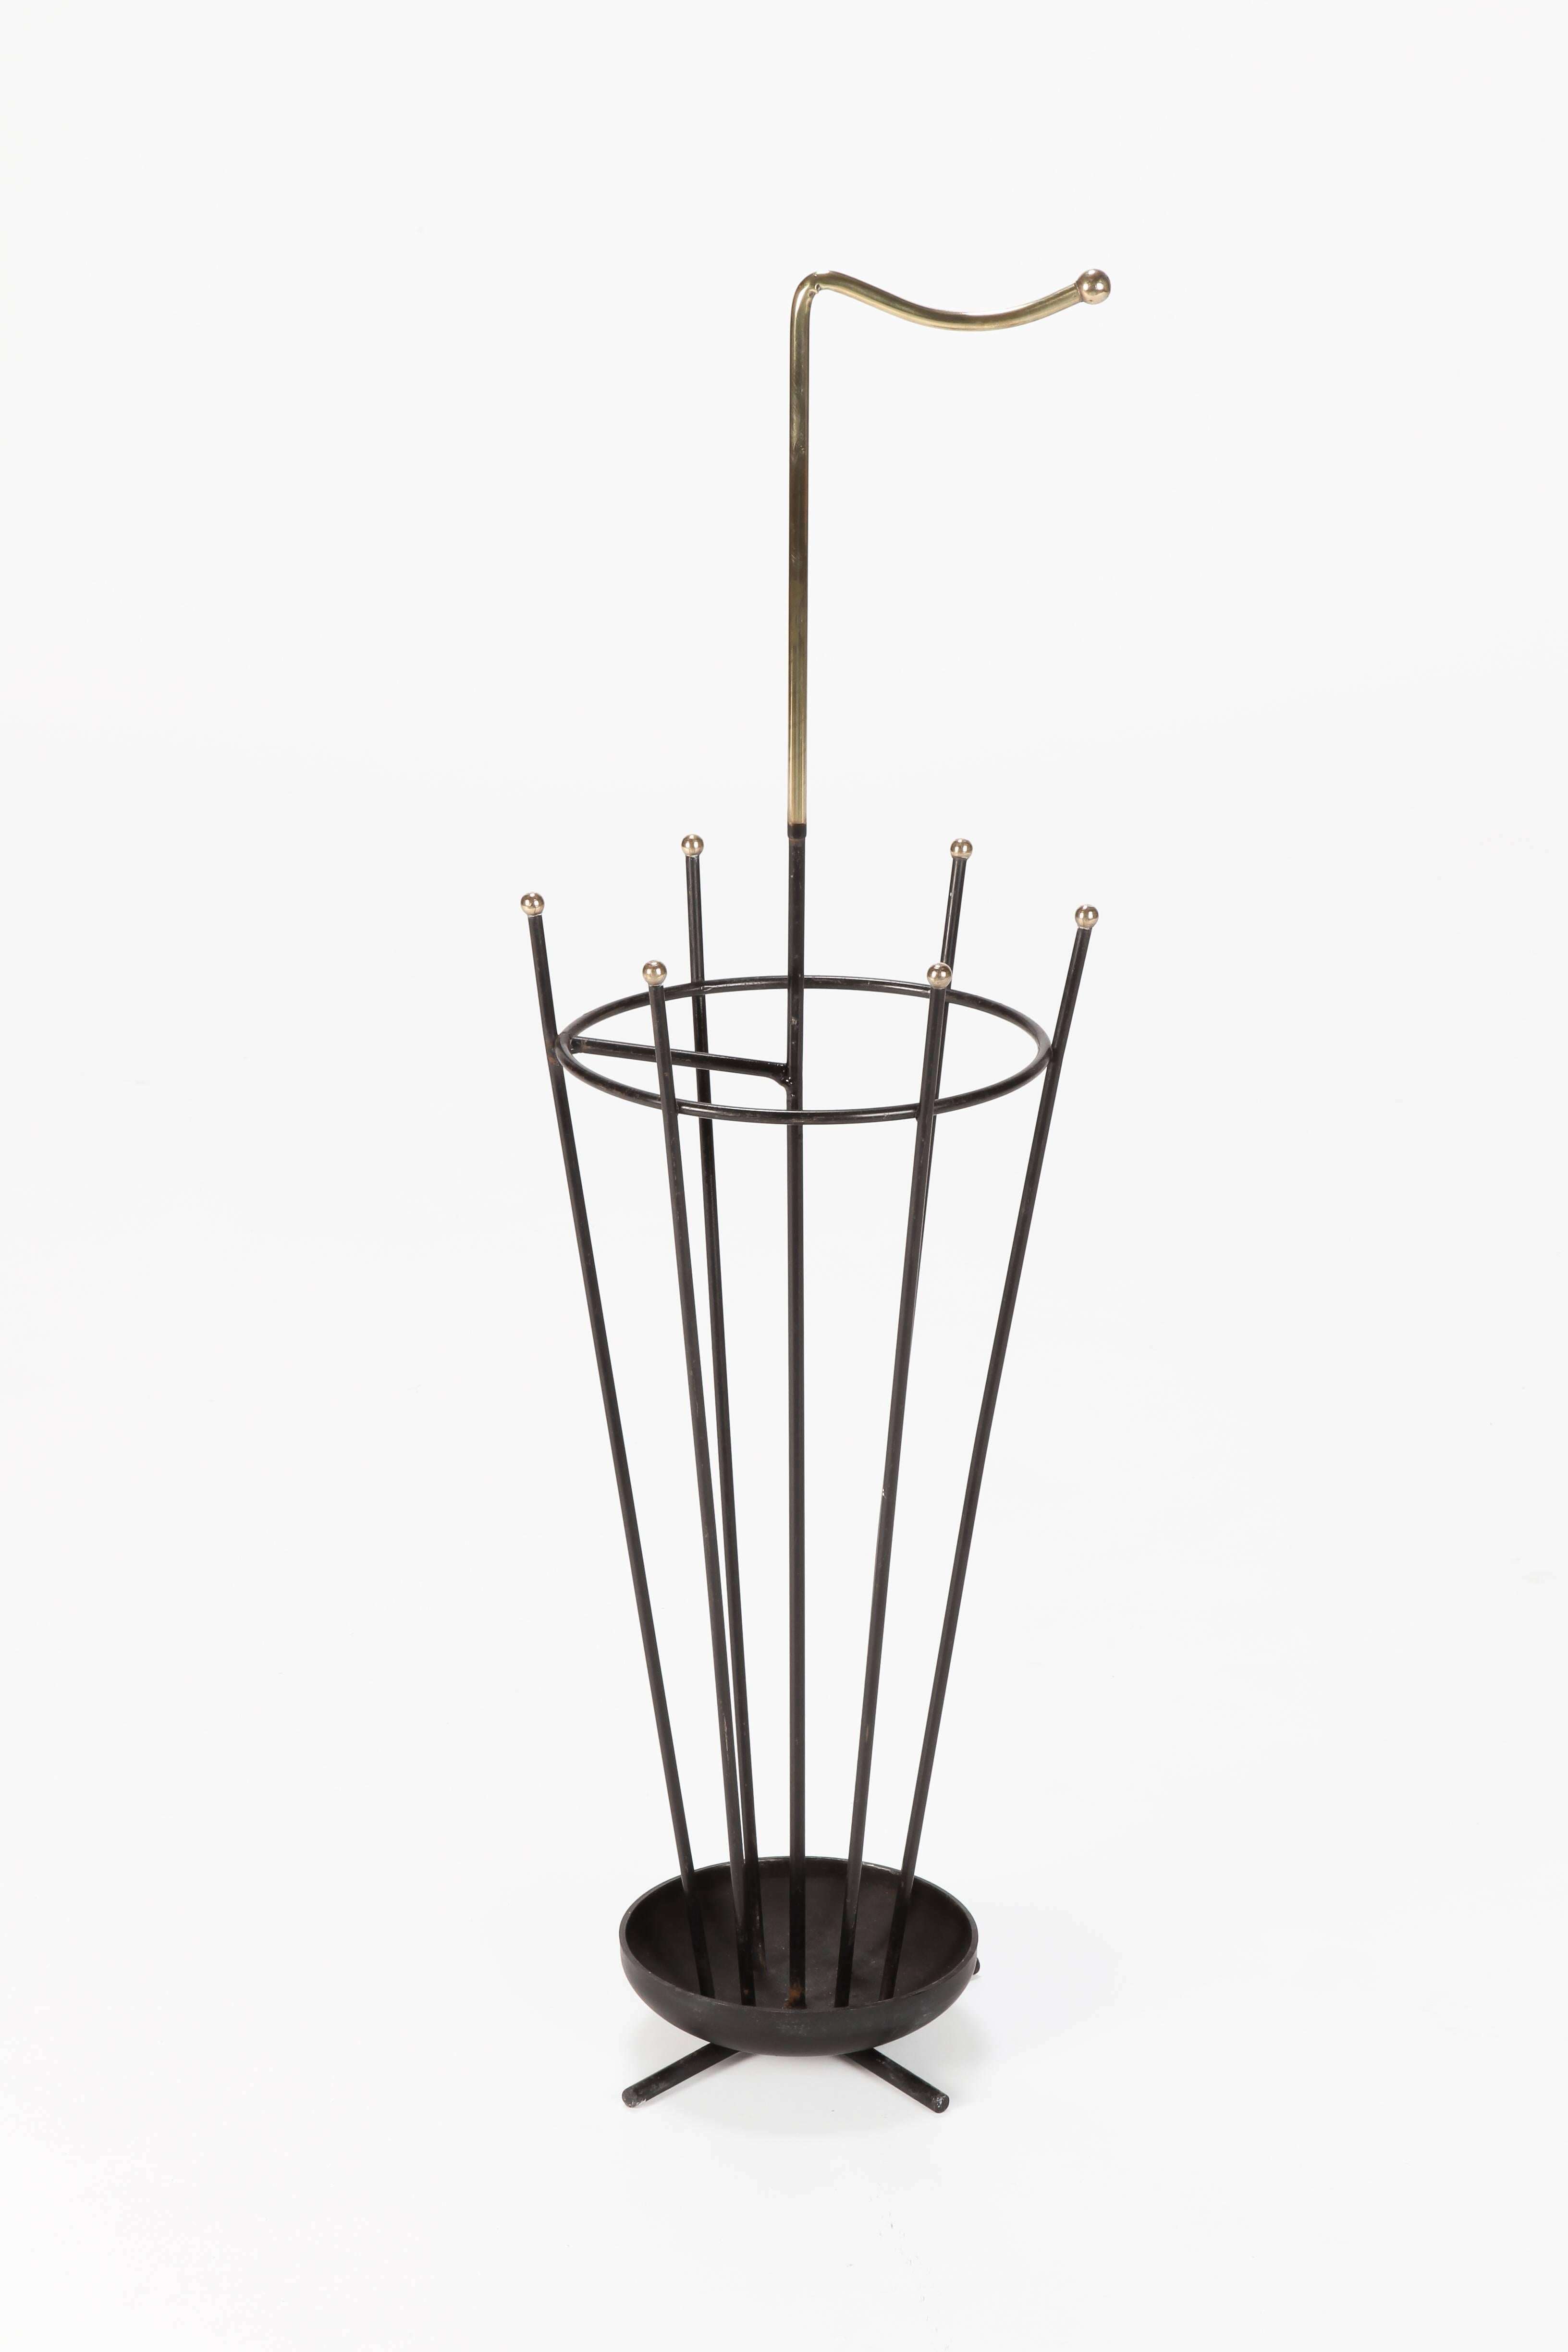 Umbrella stand in the style of Mathieu Mategot manufactured in France in the 1950’s. Black laquered metal and brass details.